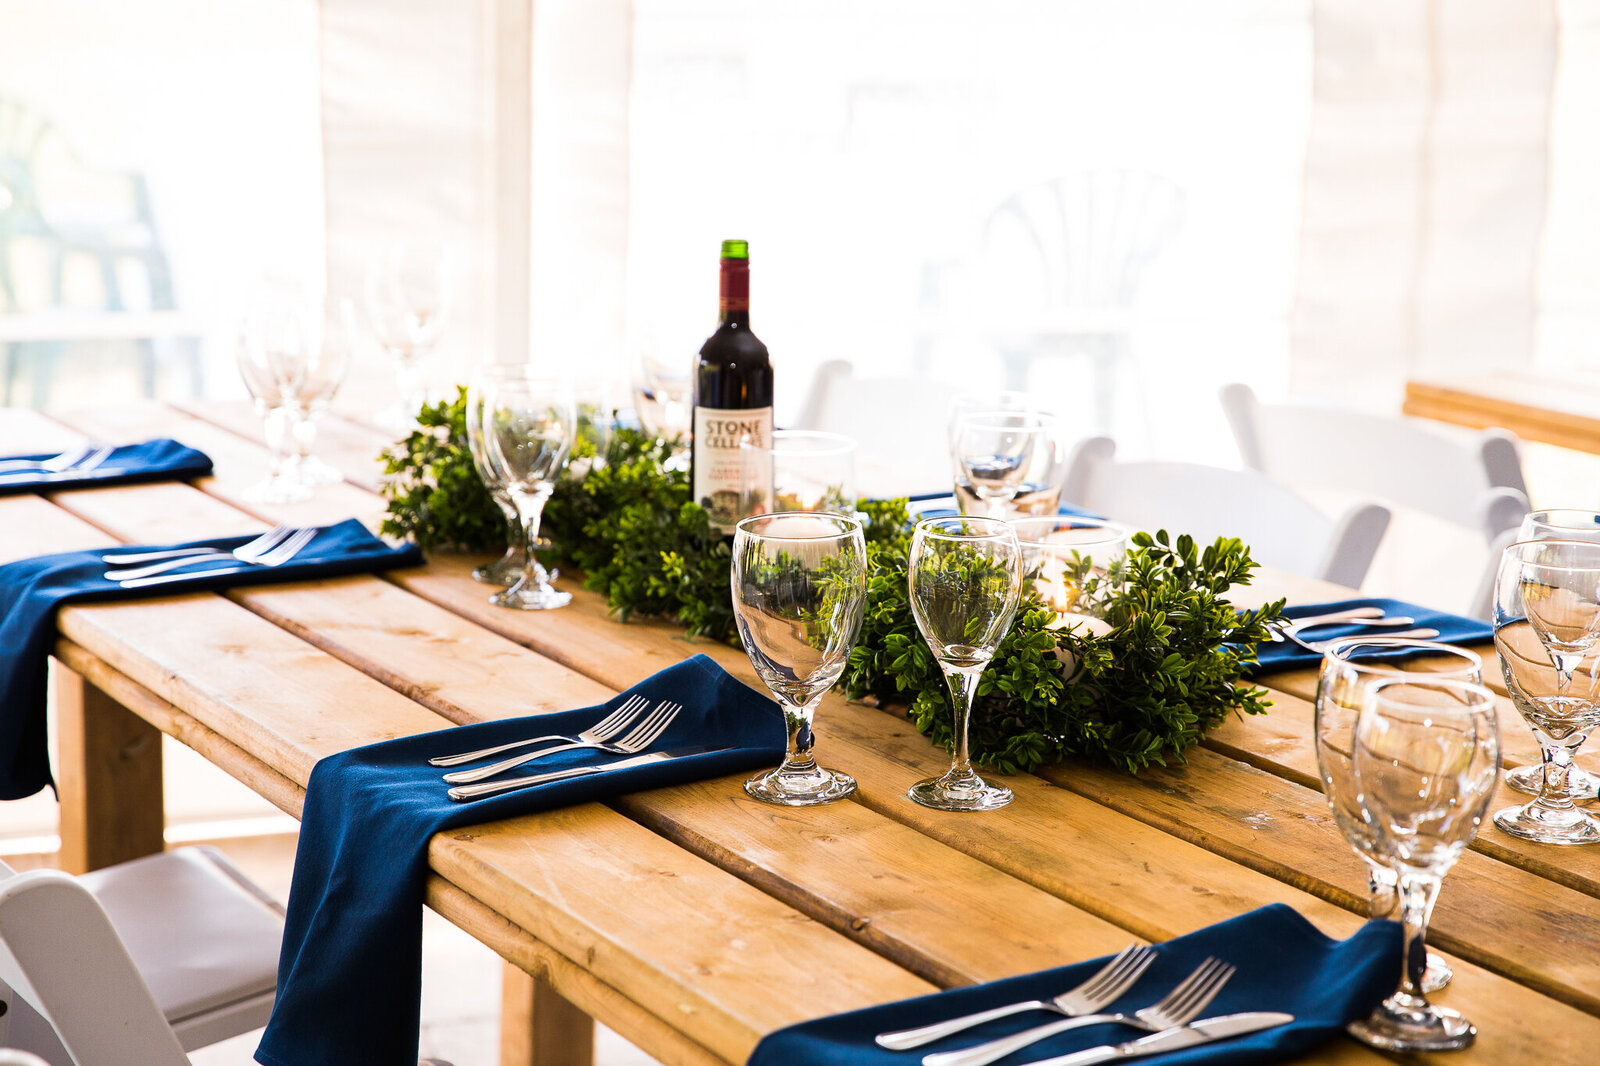 Harvest table setting with greenery and navy table linens..